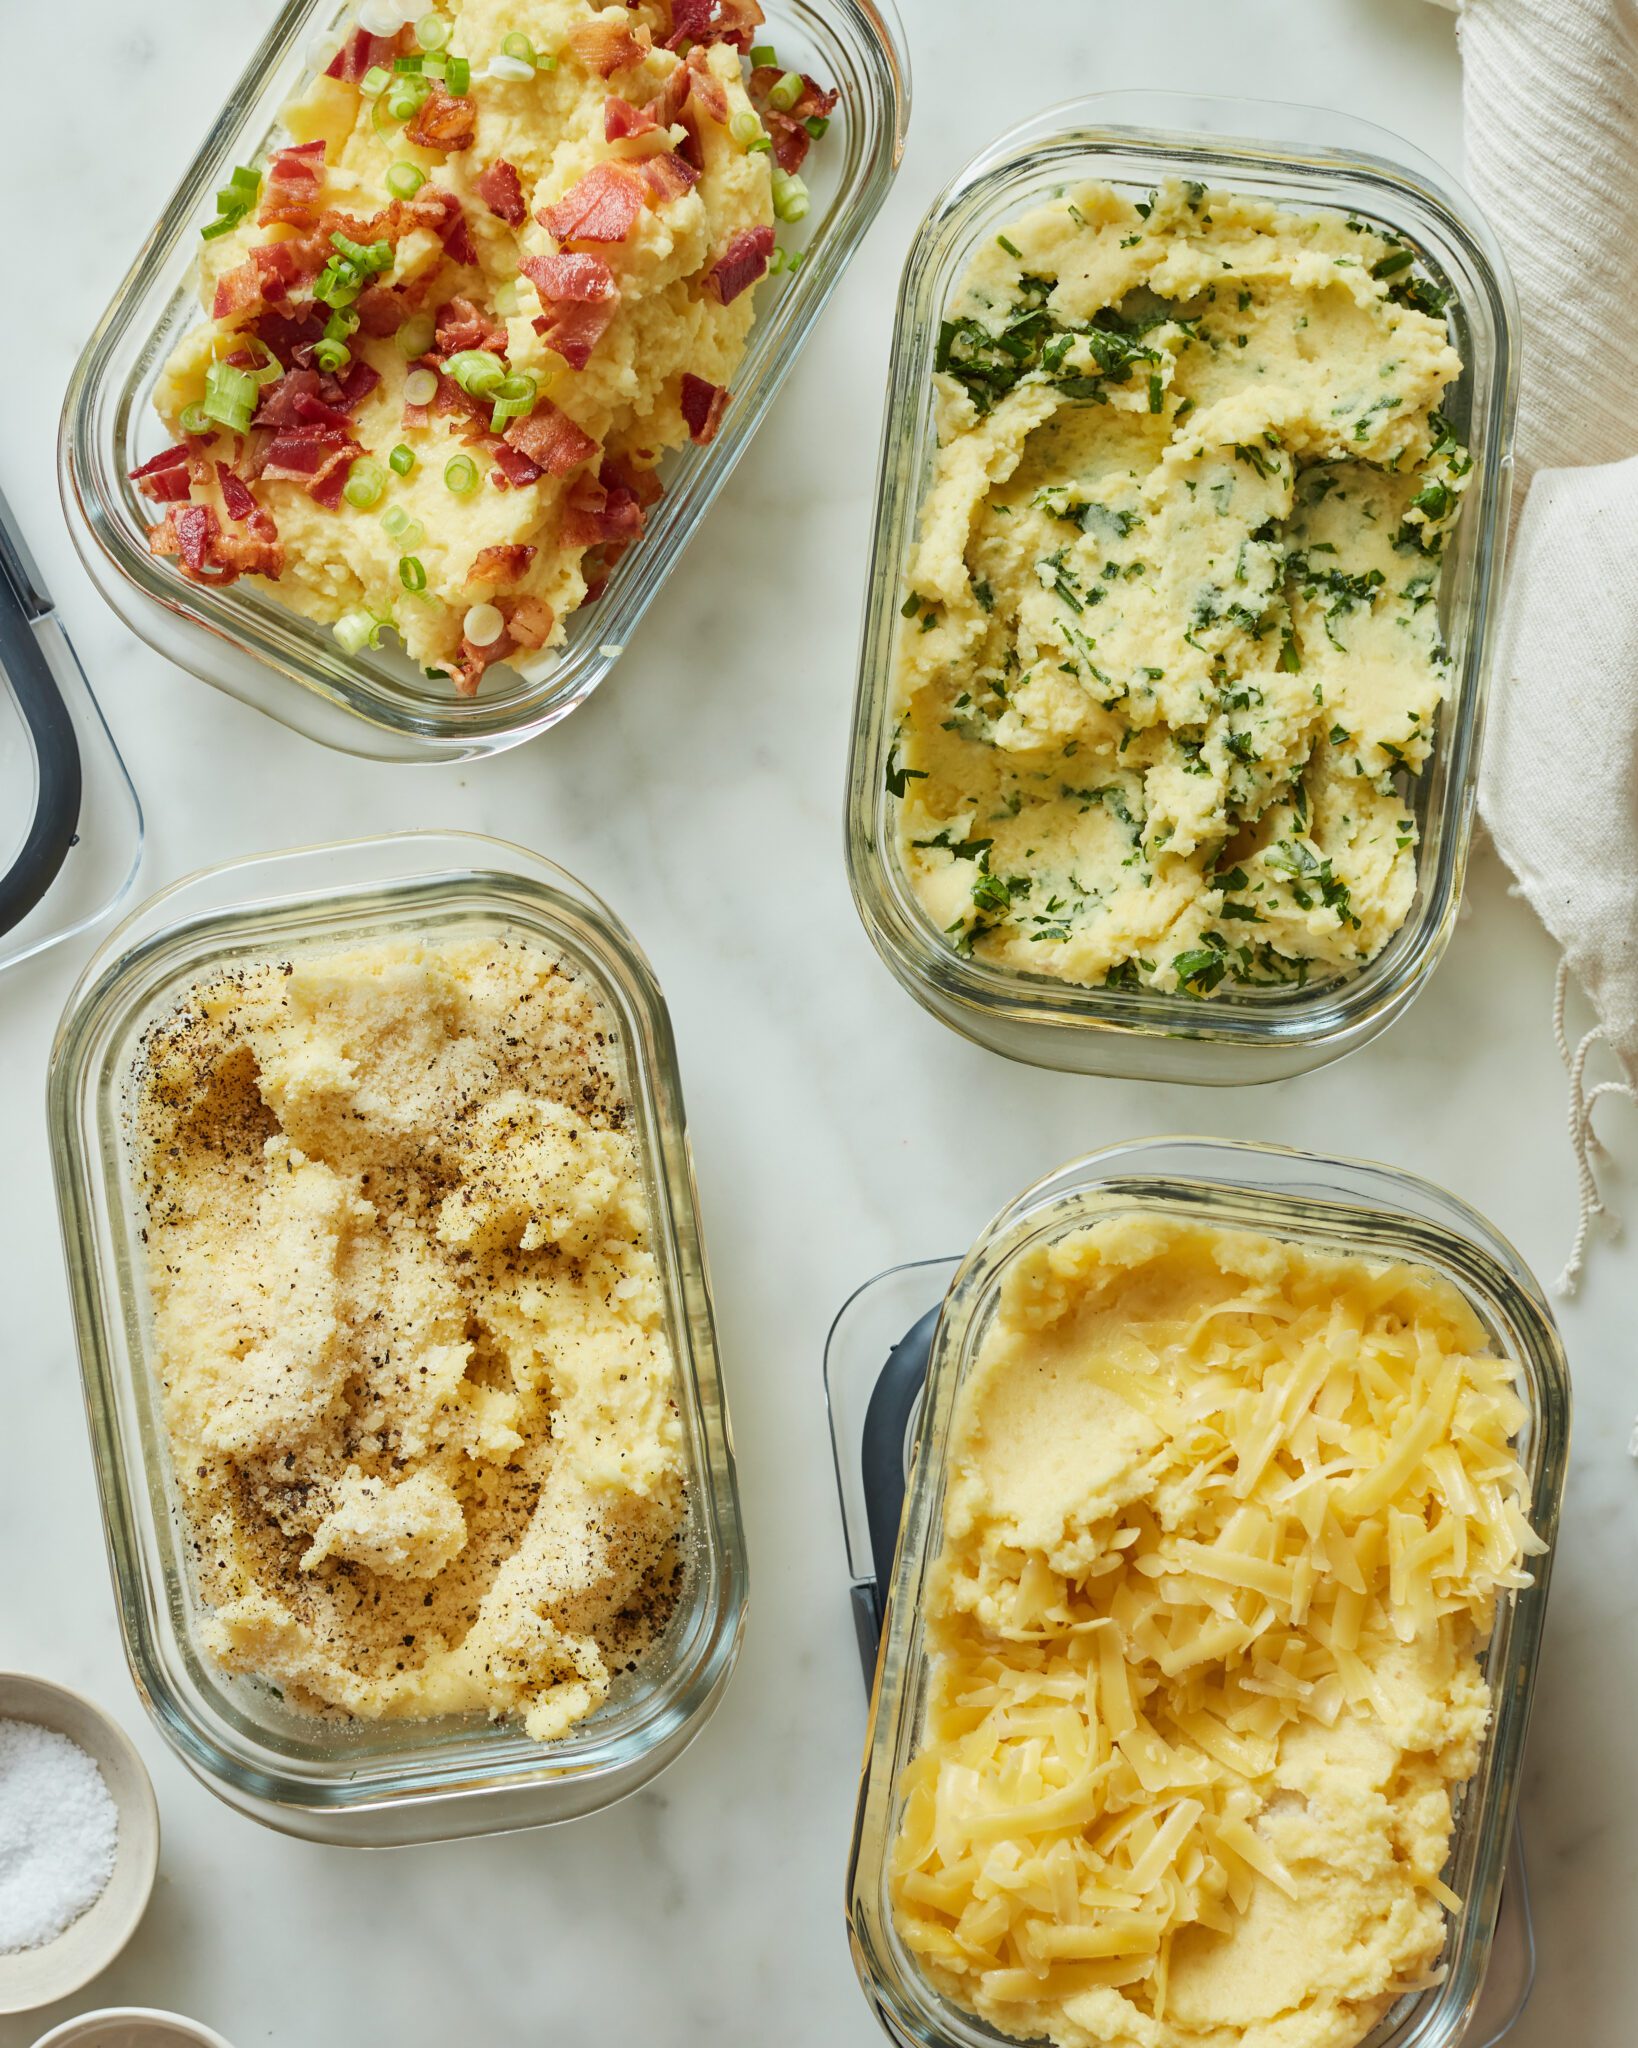 4 different dishes of mashed potatoes.  One dish is bacon and scallion mashed potatoes, one dish is herby olive oil mashed potatoes, one dish is cacio e pepe mashed potatoes, and one dish is white cheddar mashed potatoes.  